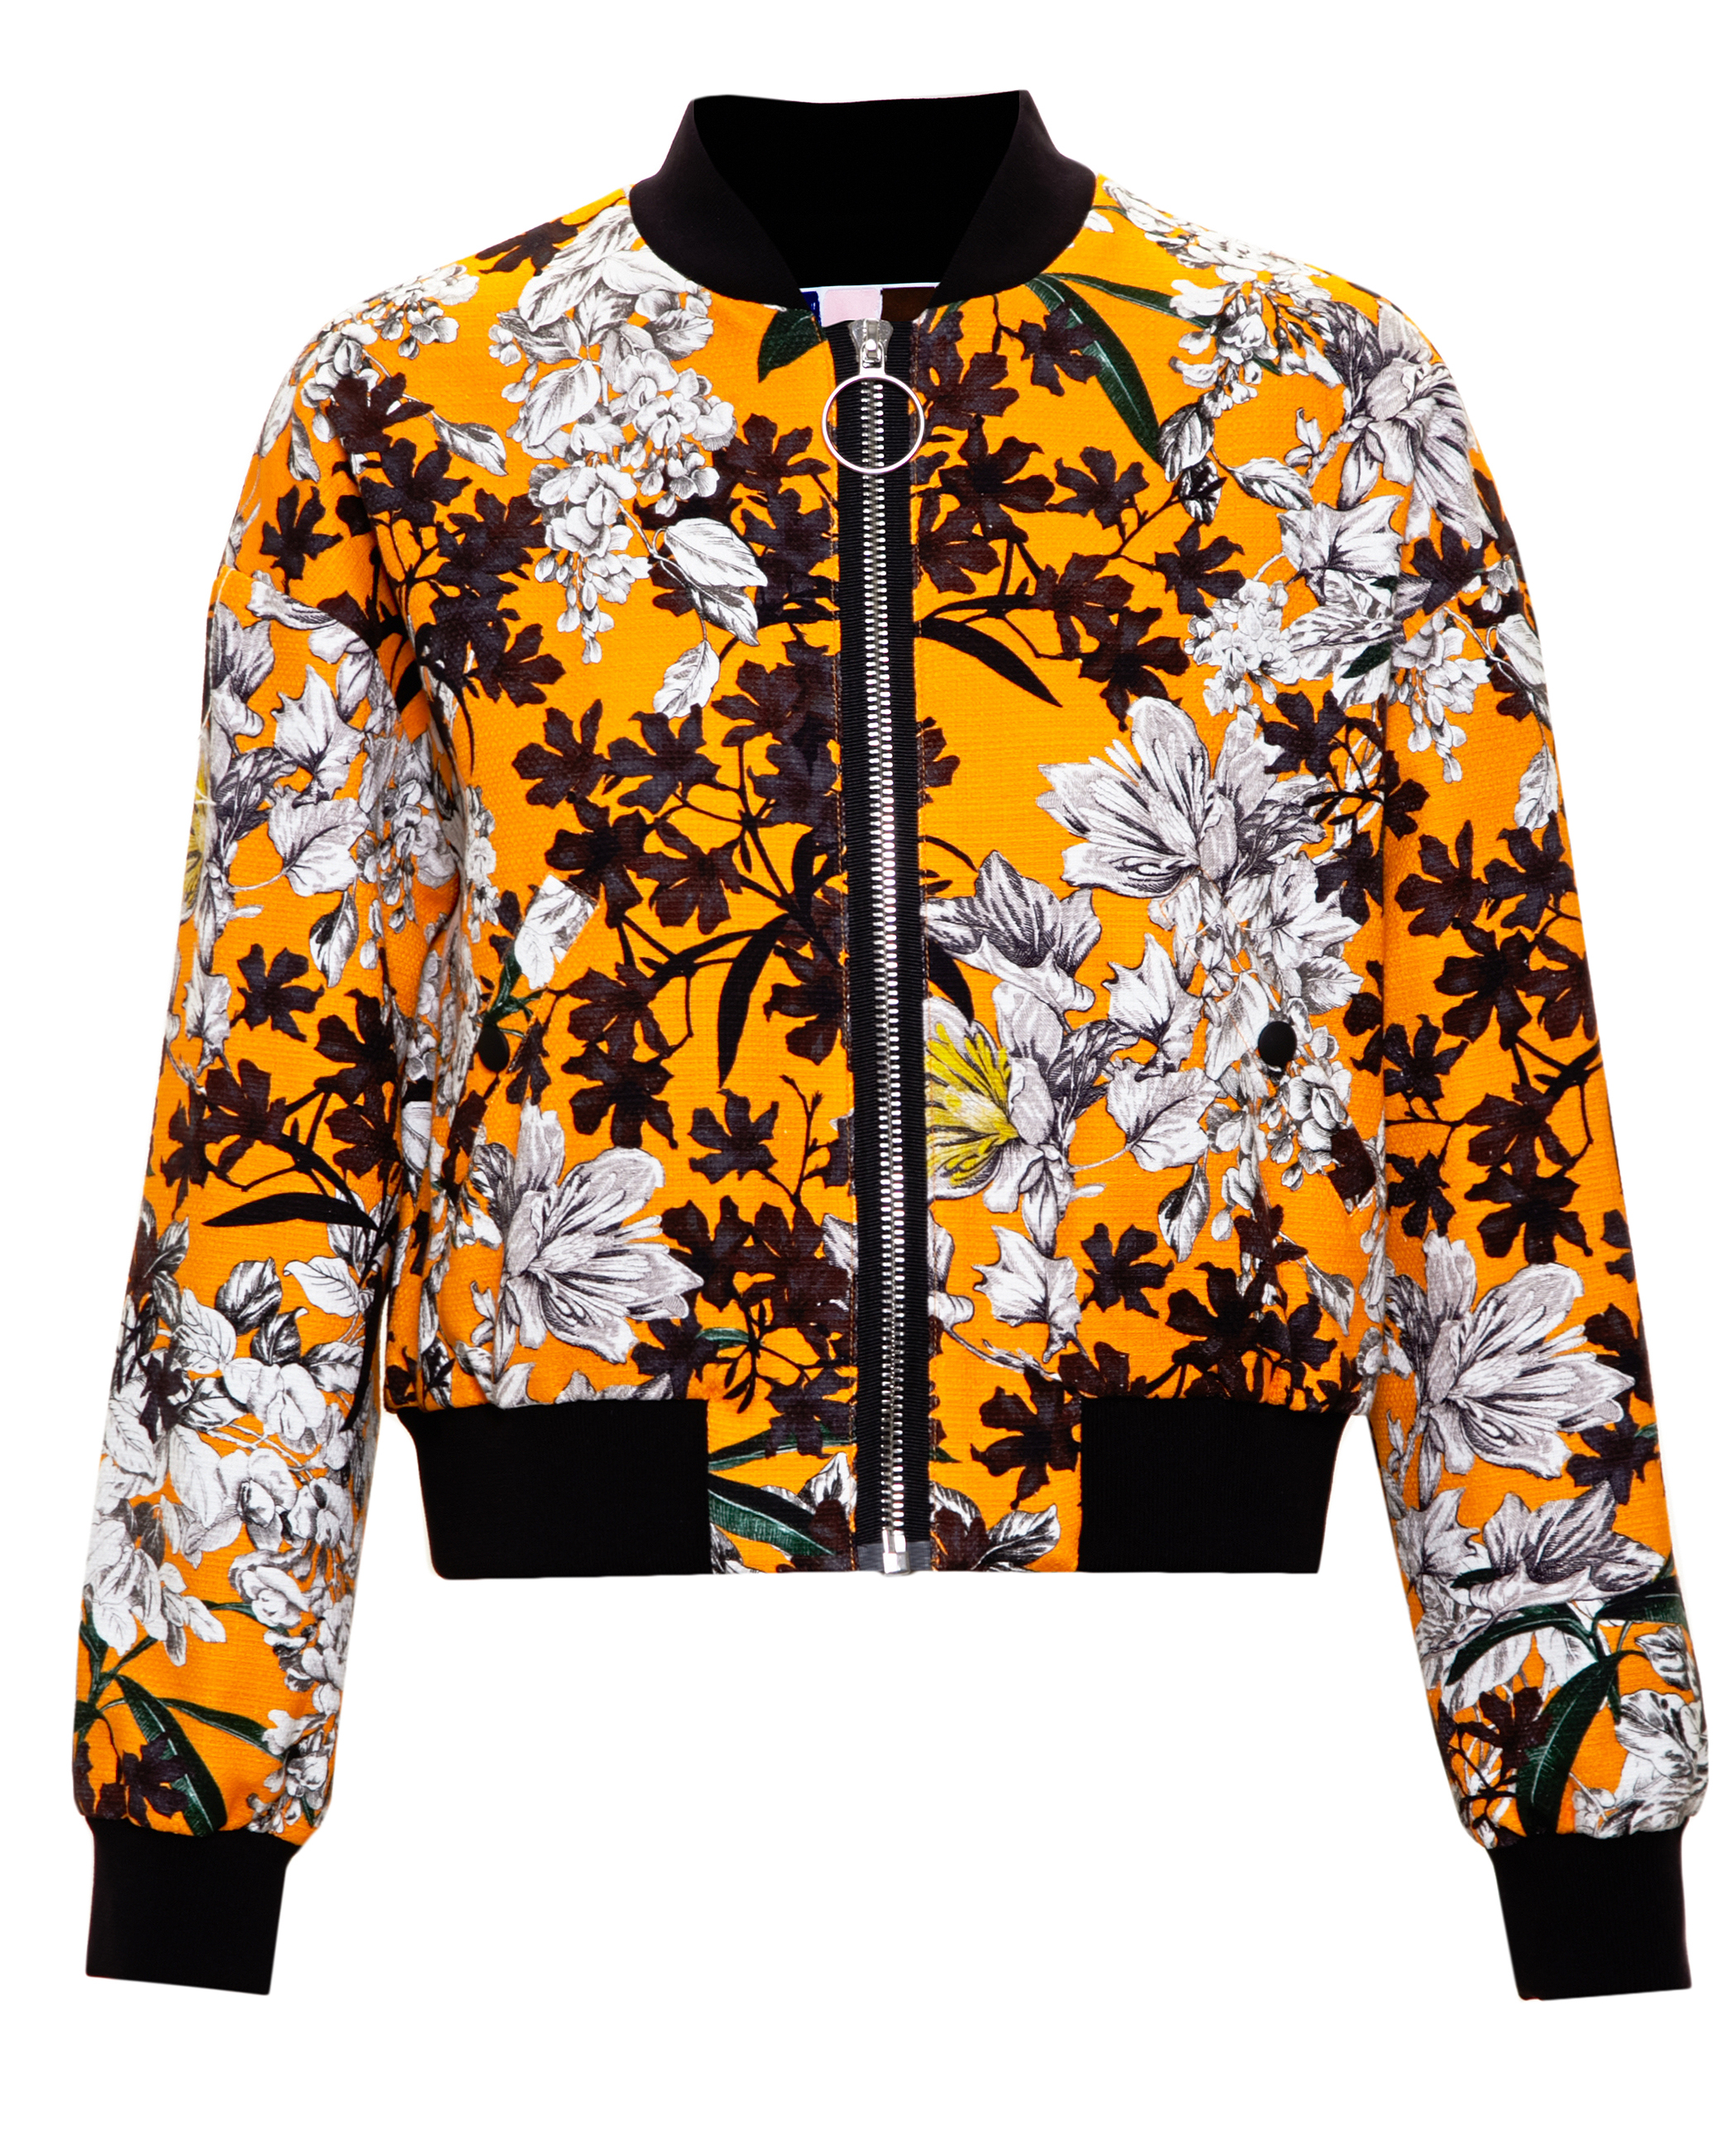 Lyst - Msgm Floral Print Bomber Jacket in Yellow